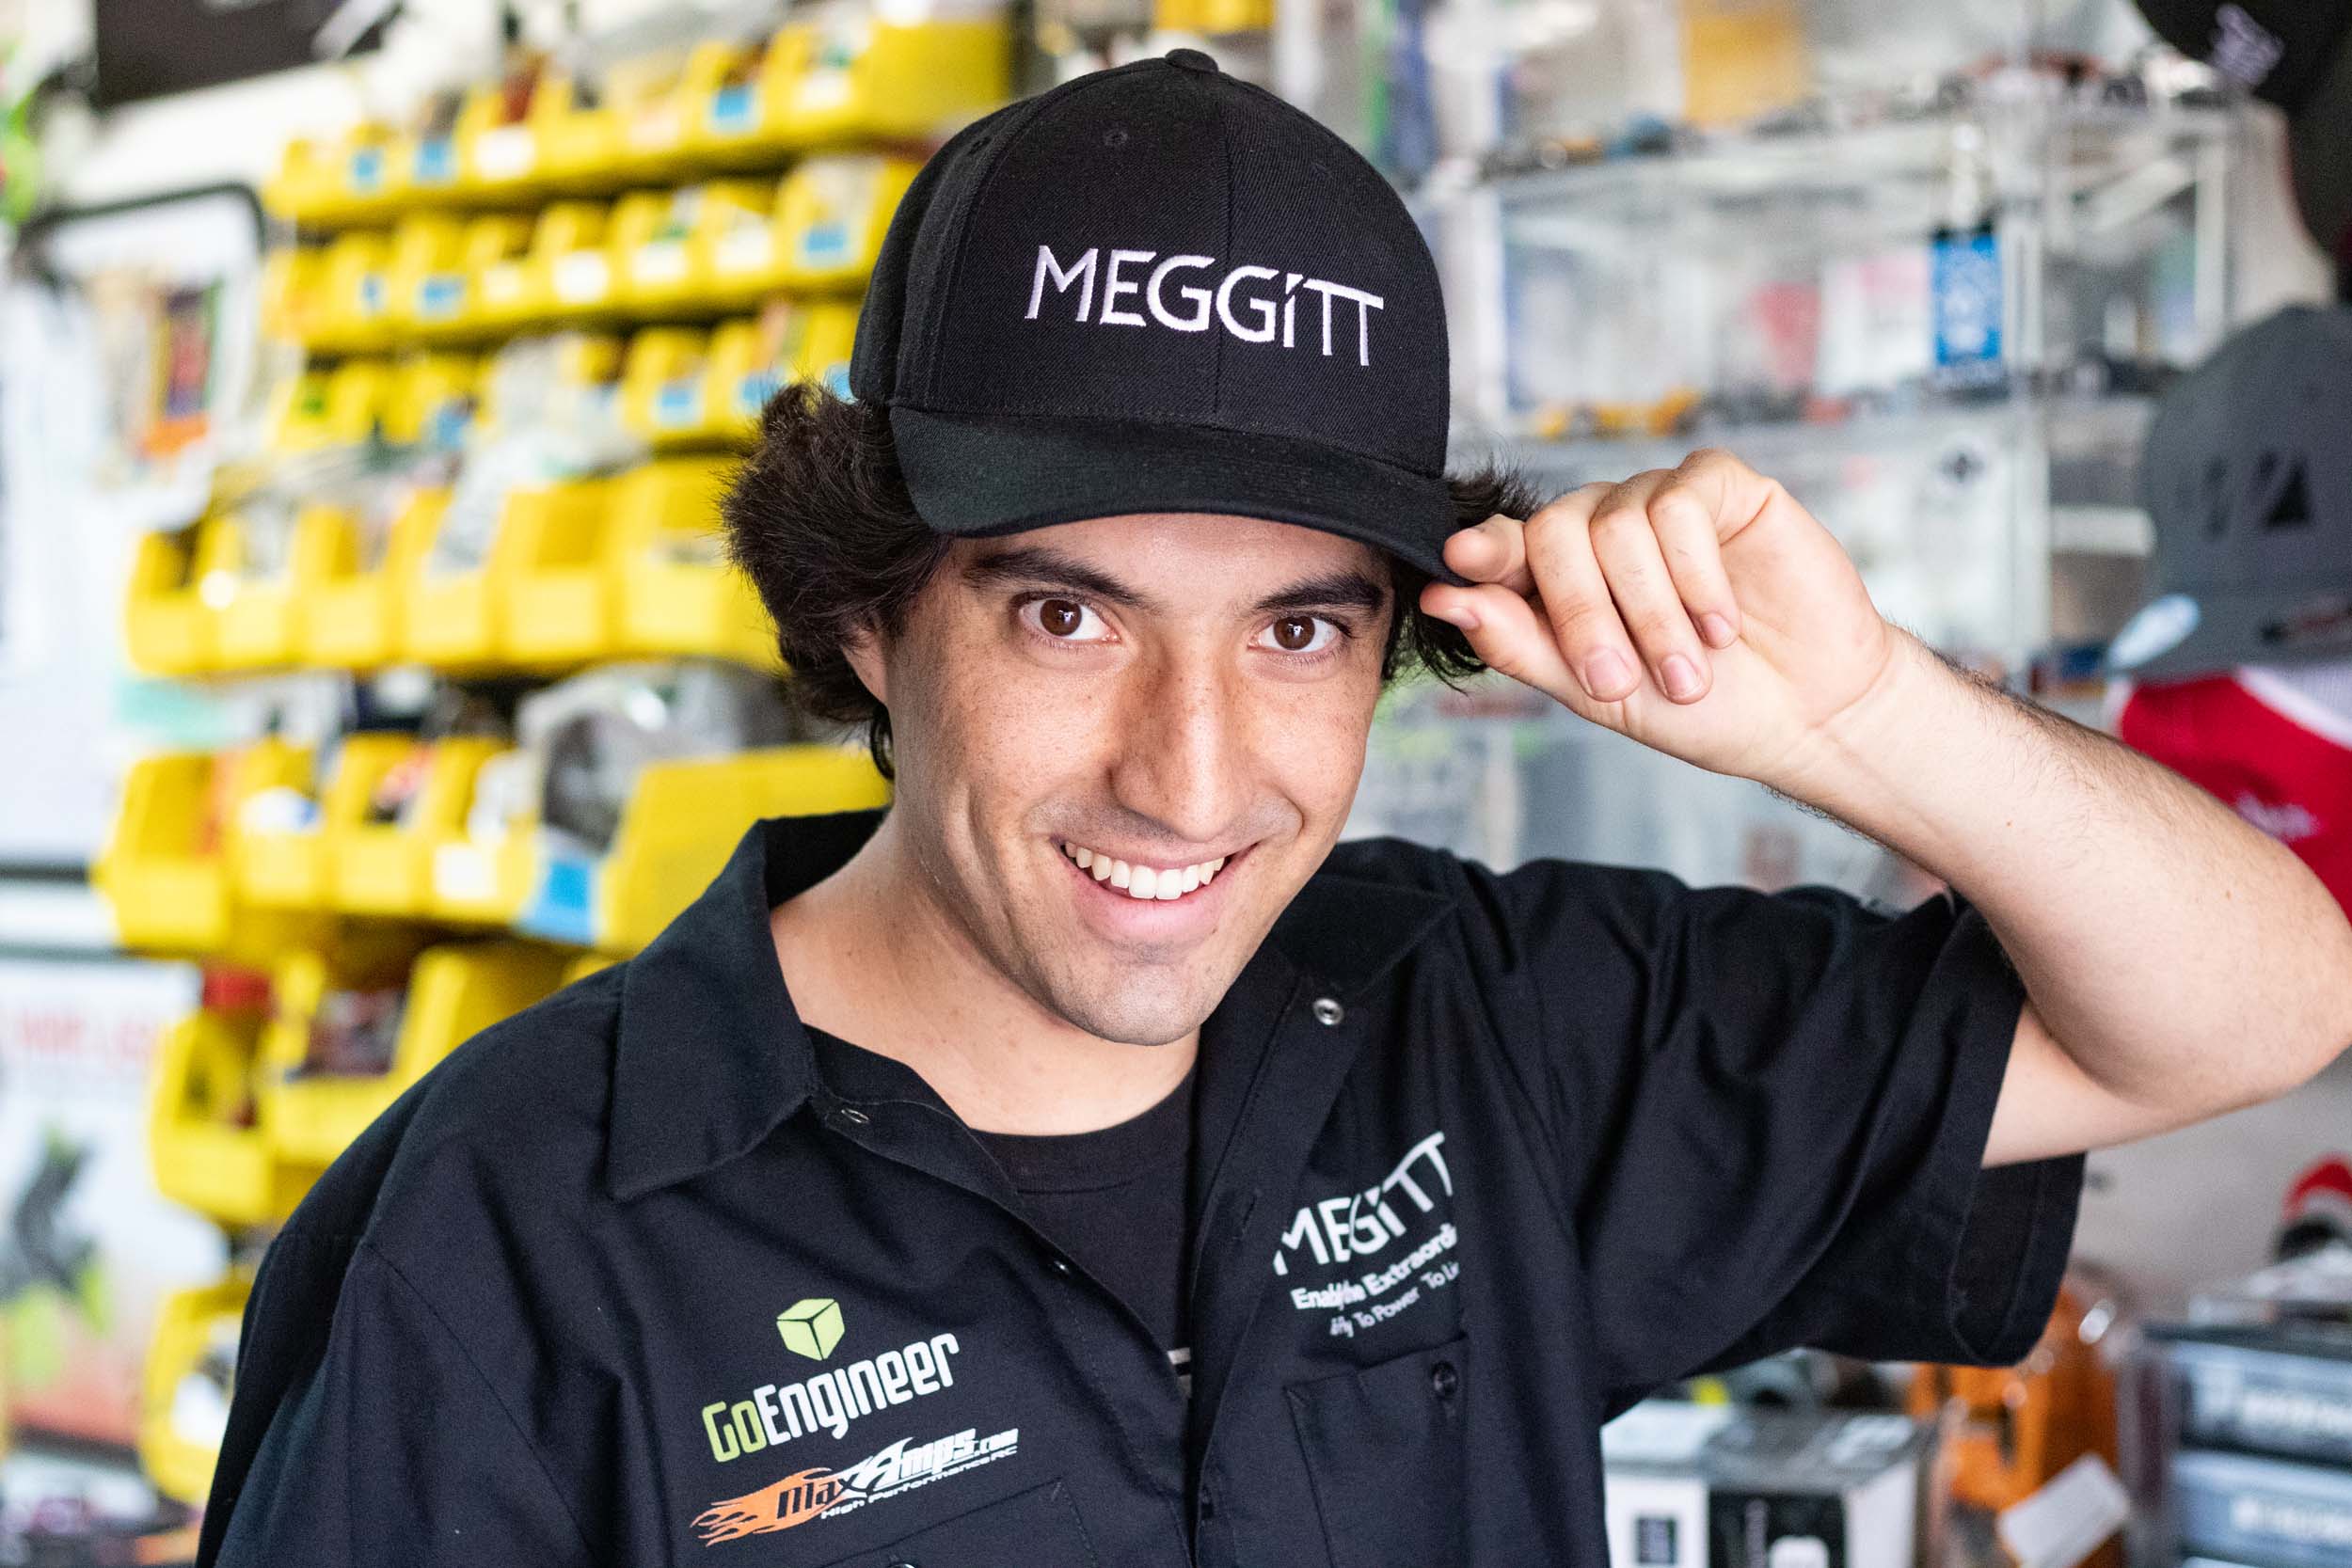 A smiling, male CPP Engineering student tipping his black cap. The cap has the text MEGGITT. His button shirt has logos with the text Go Engineer and Max Amps.